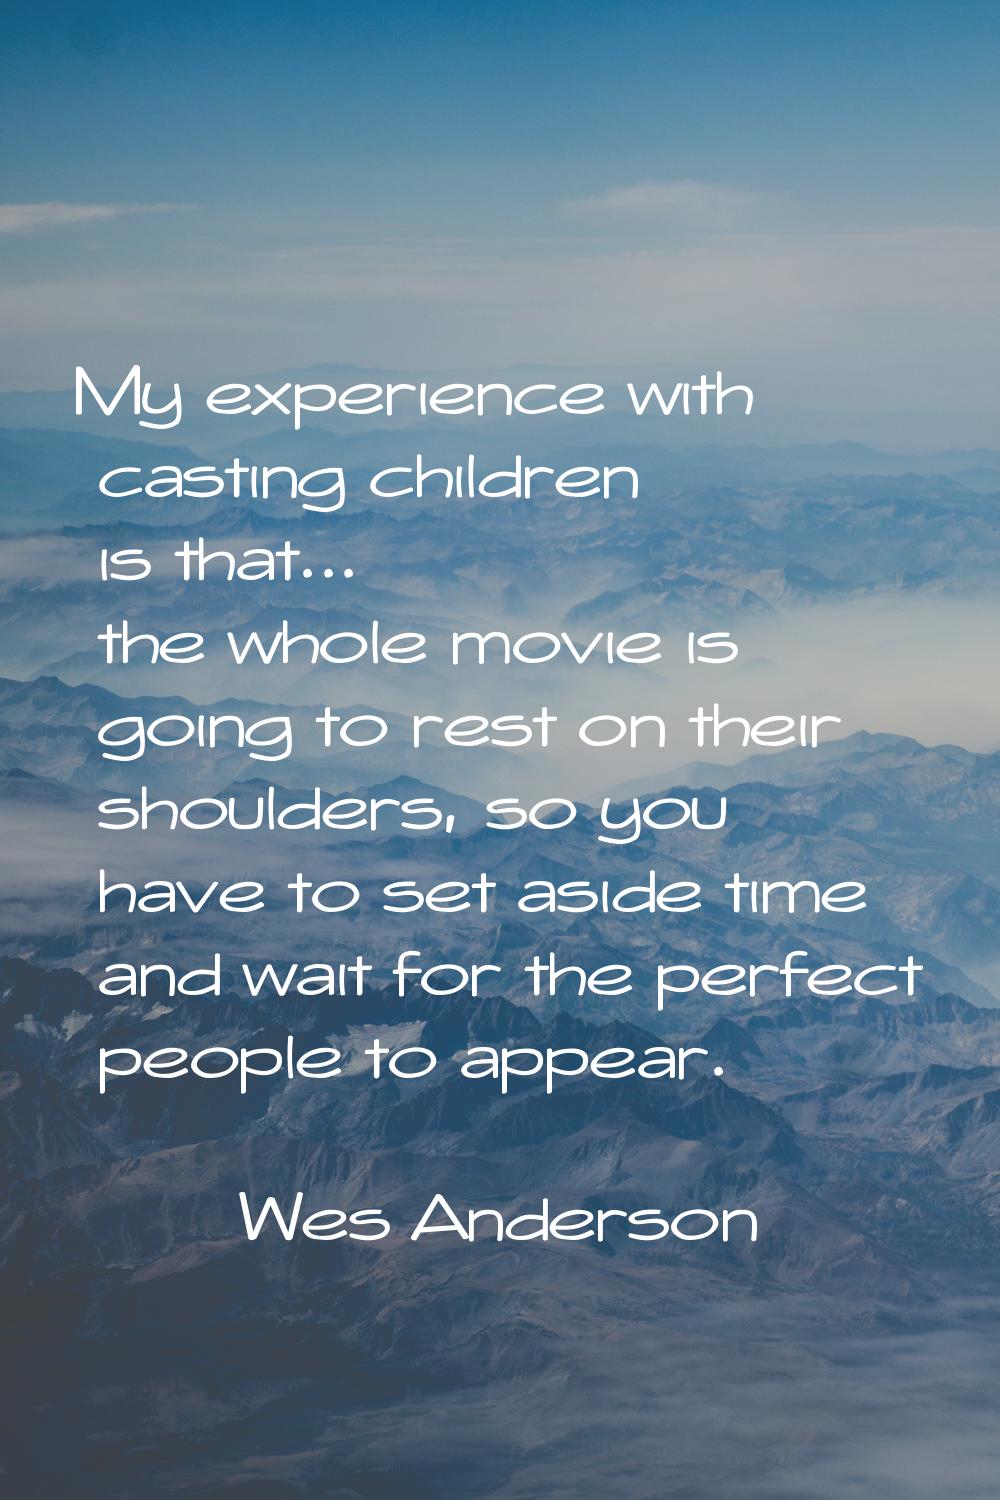 My experience with casting children is that... the whole movie is going to rest on their shoulders,